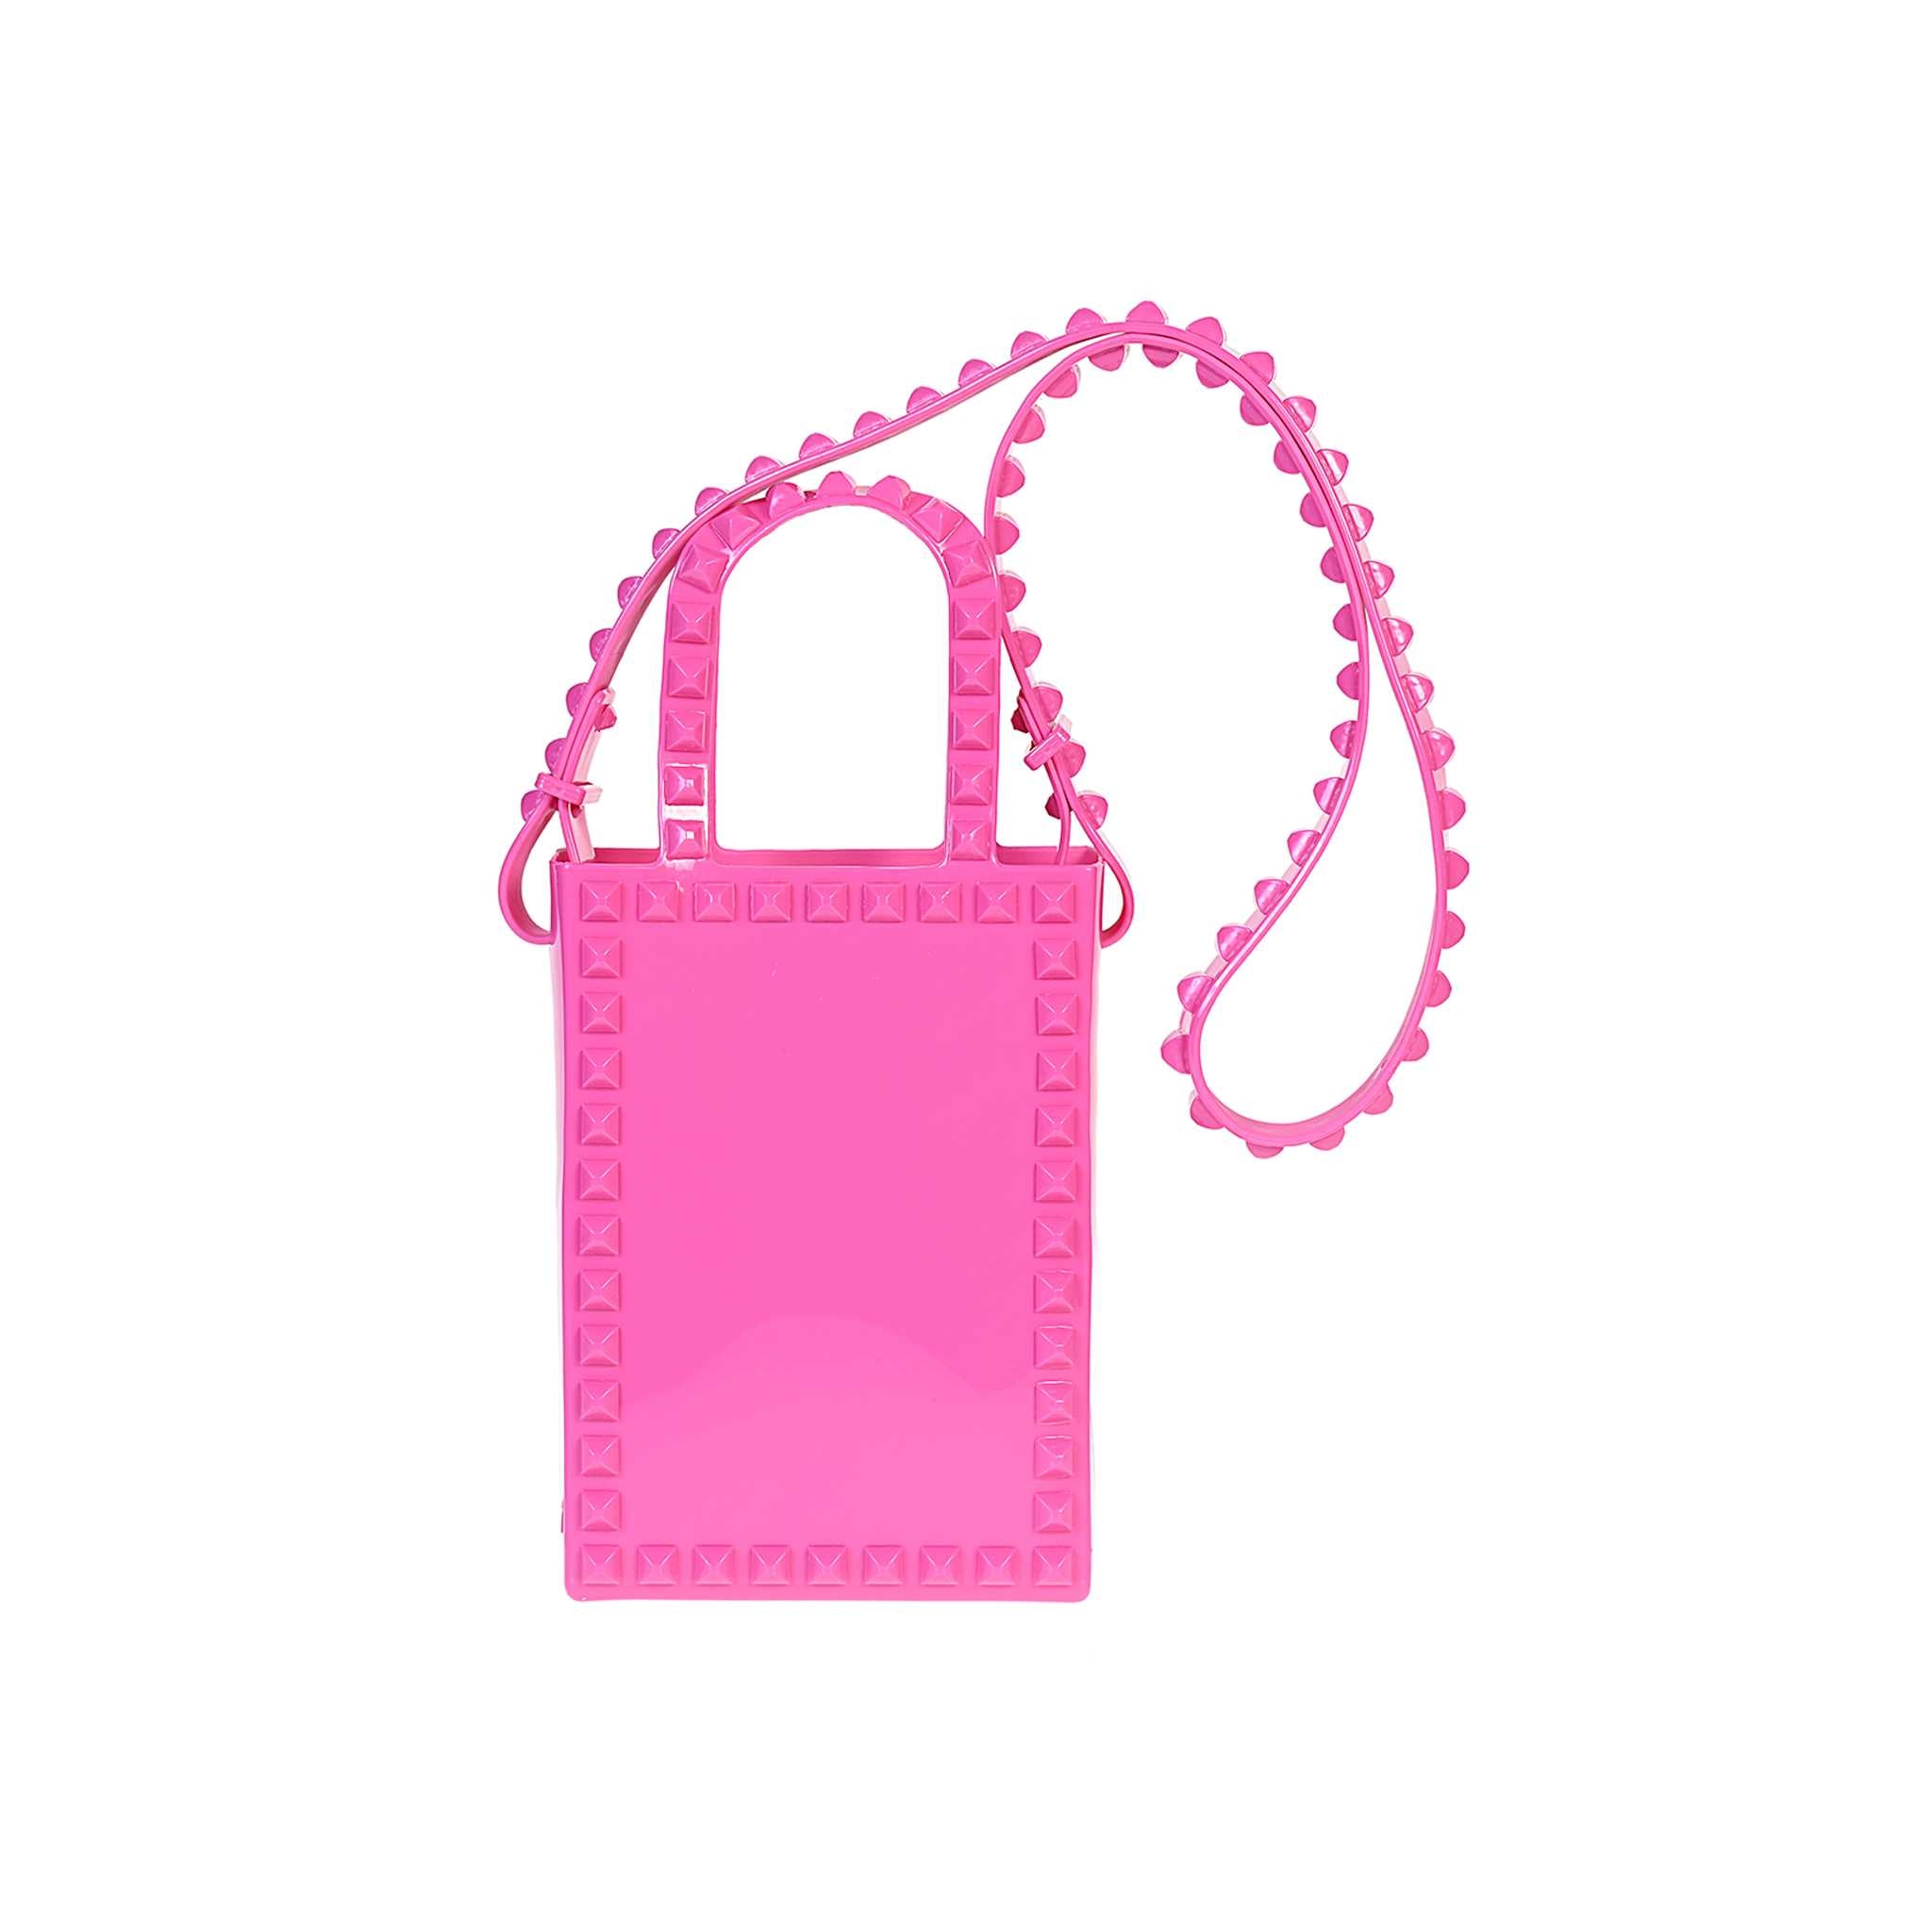 Royalty-Free (RF) Clipart Illustration of a Cute Chihuahua In A Pink Bag by  BNP Design Studio #215247